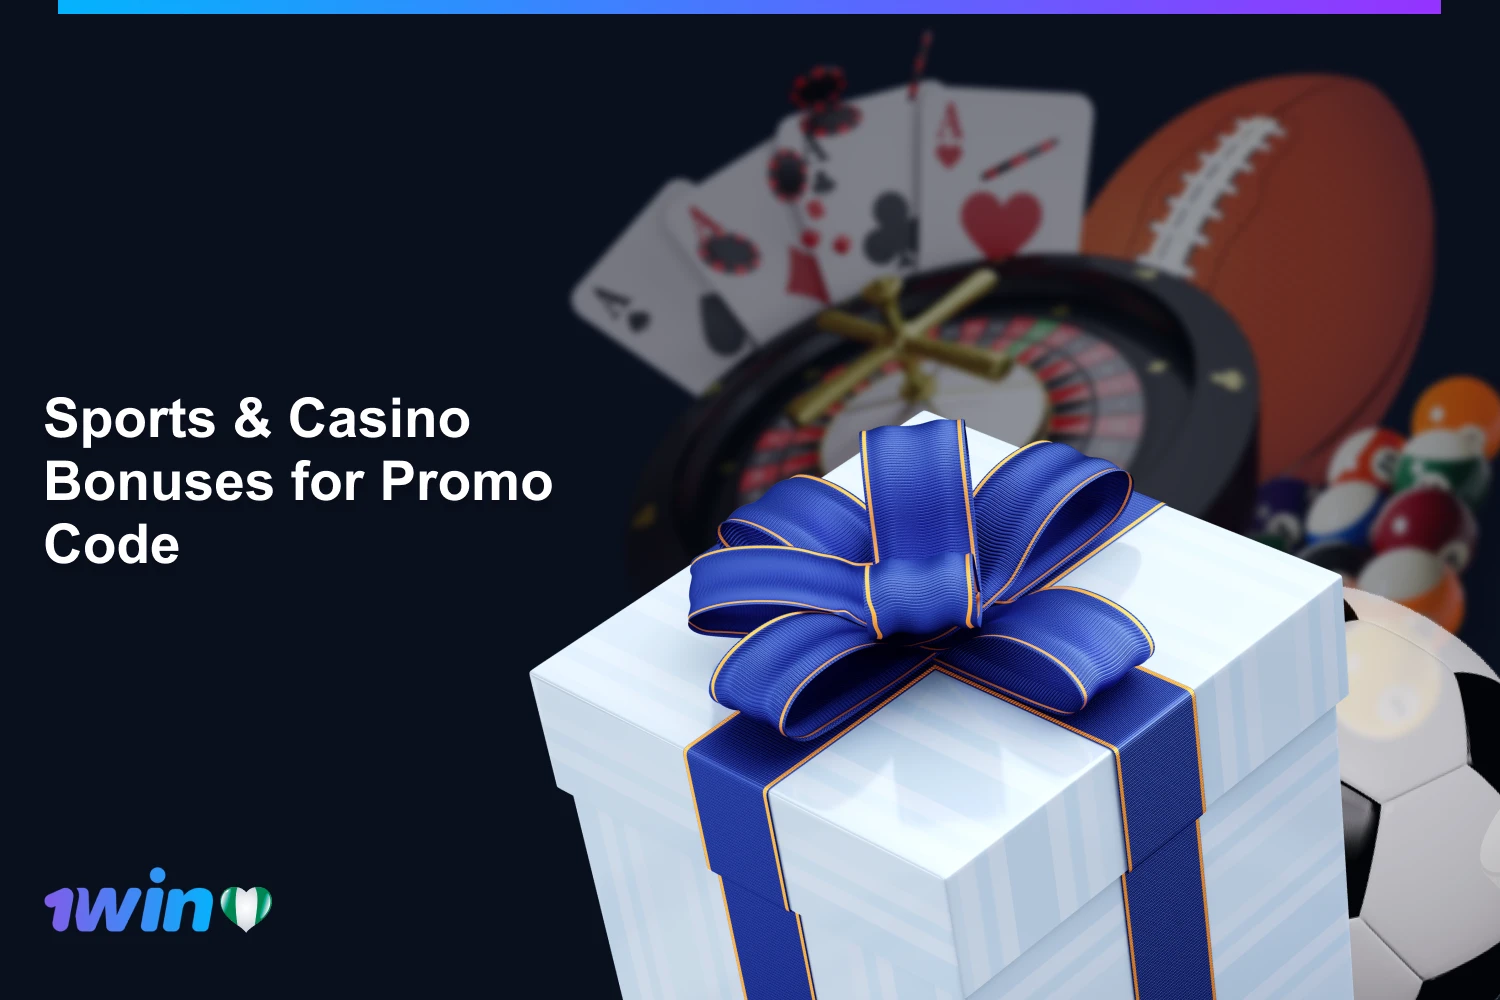 Sports & Casino 1win Bonuses for Promo Code consists of a simple first deposit system